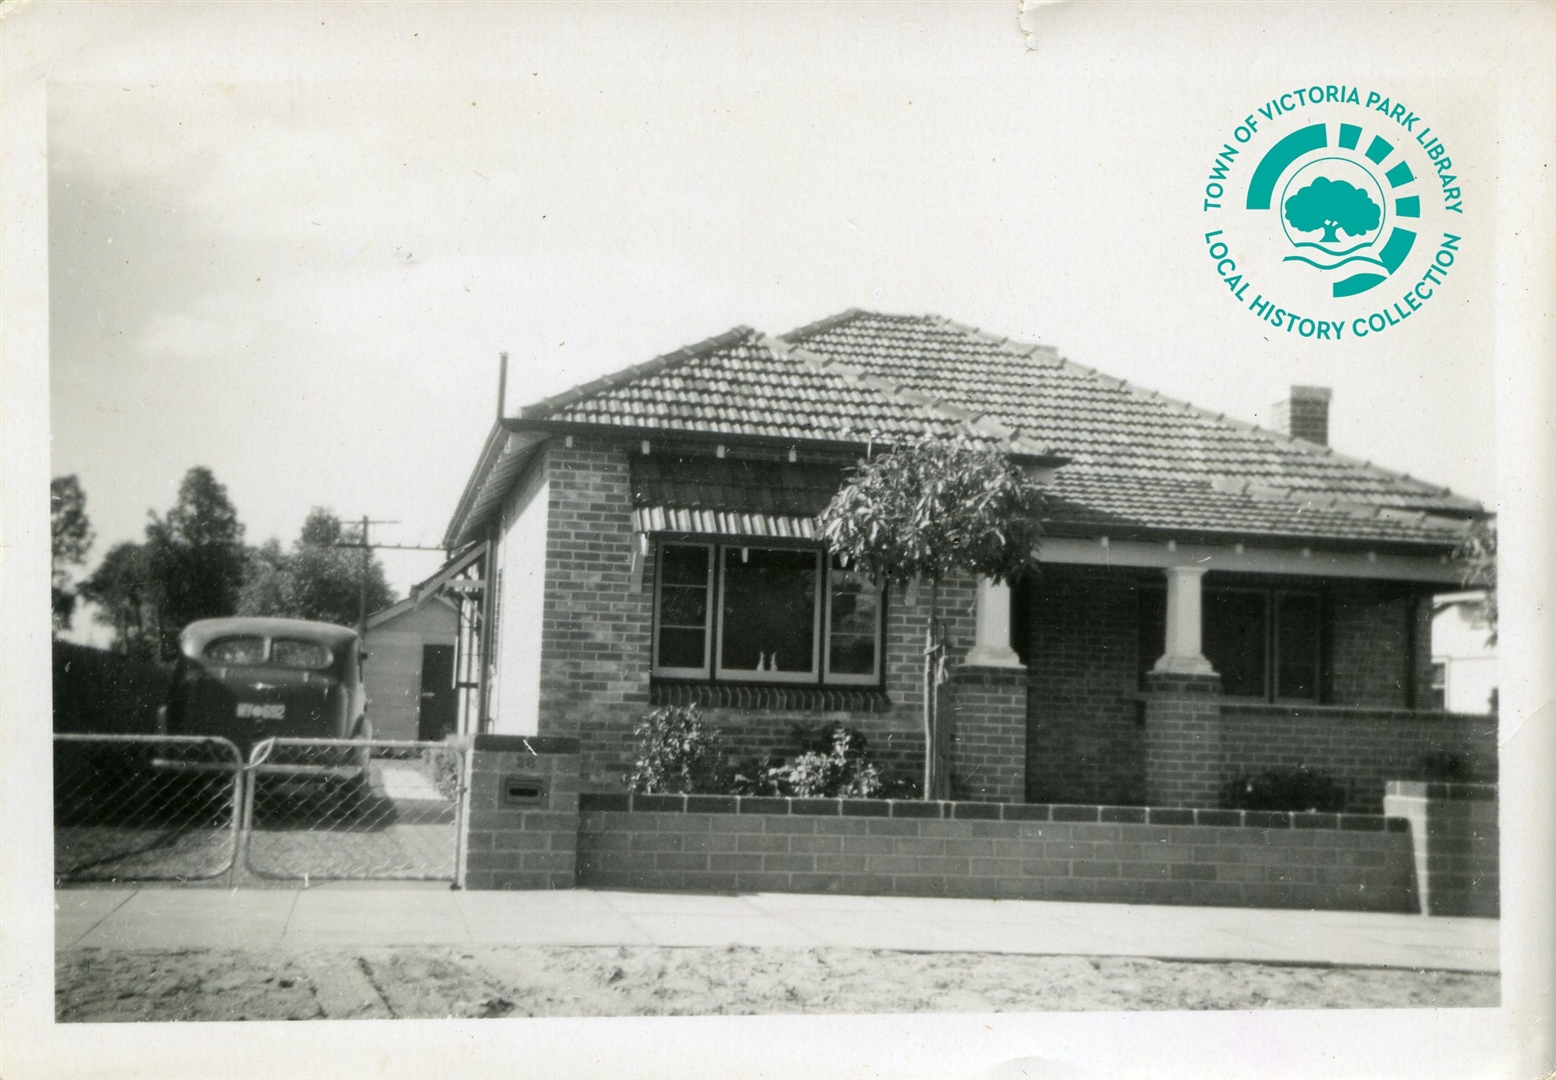 PH00044-11 28 Star Street, Carlisle - with front homemade cement brick fence built, c. 1951 Image